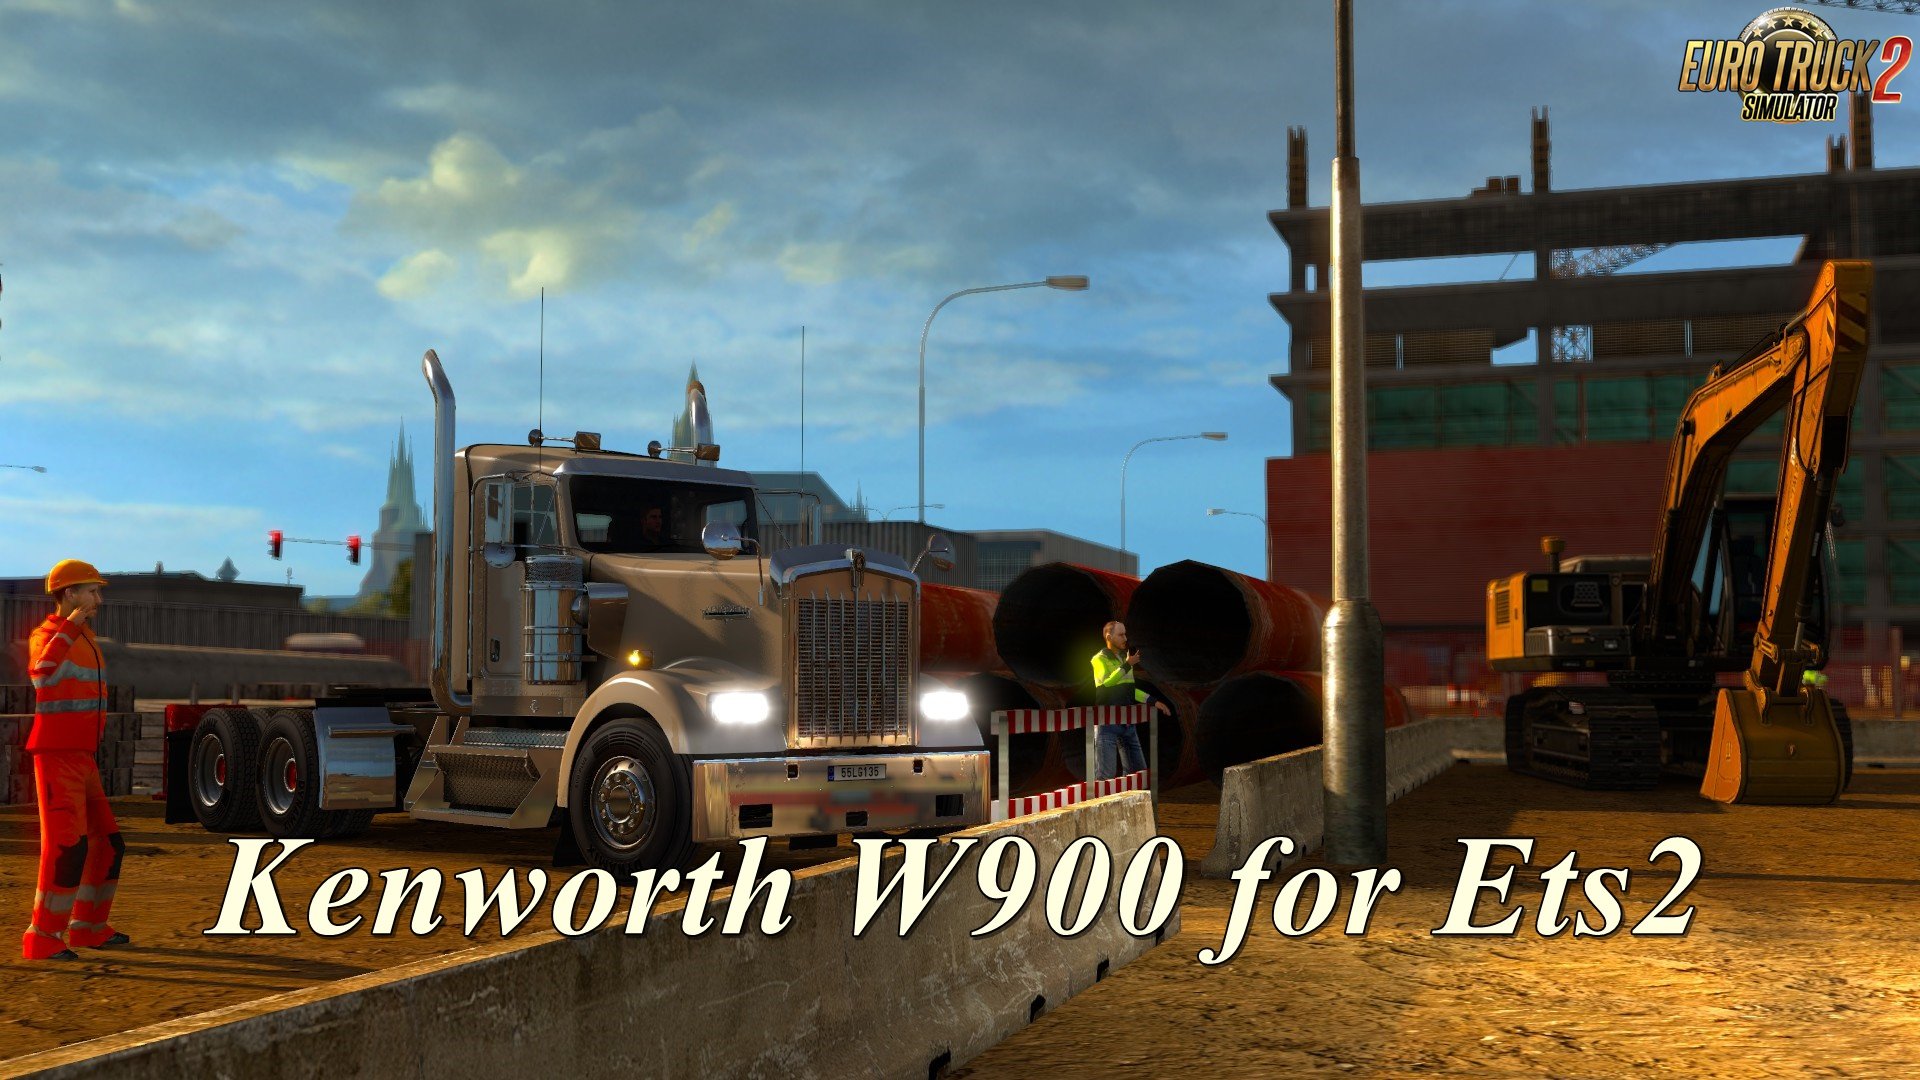 Kenworth W990 for Ets2 (1.35.x and up)